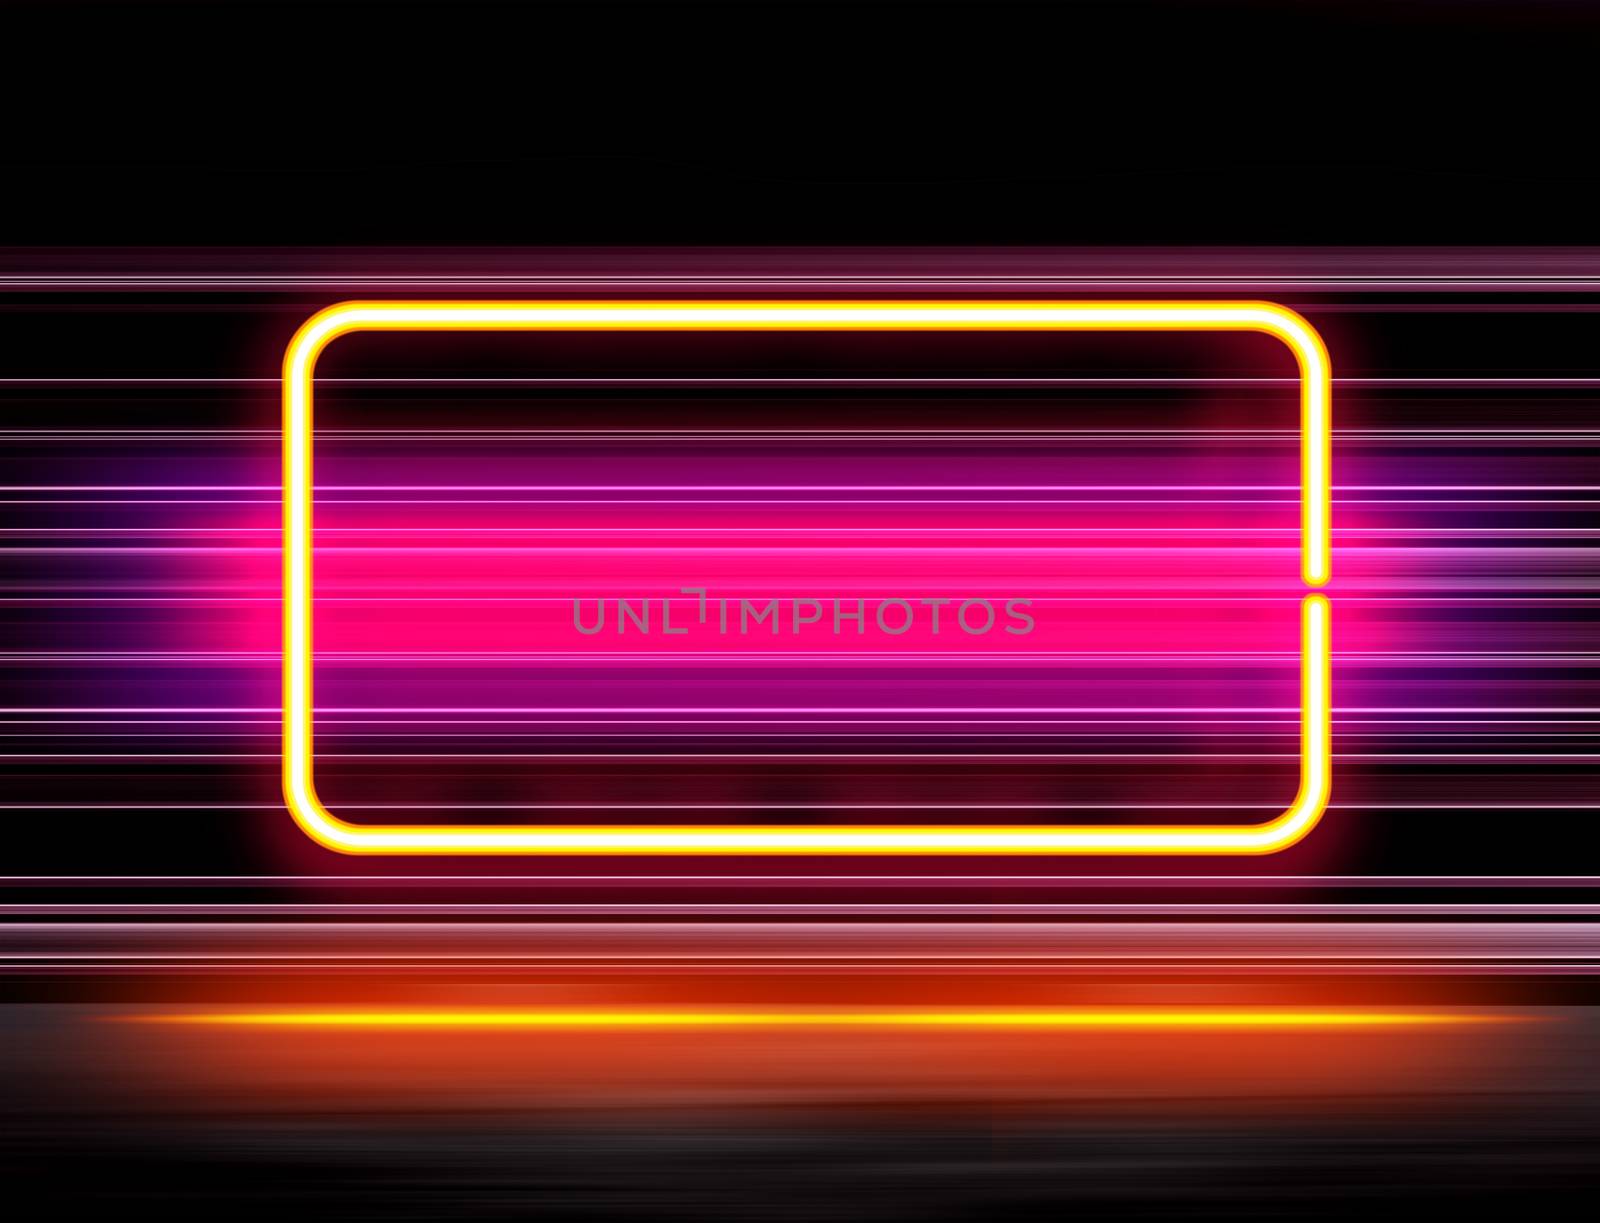 highly technological design with neon elements